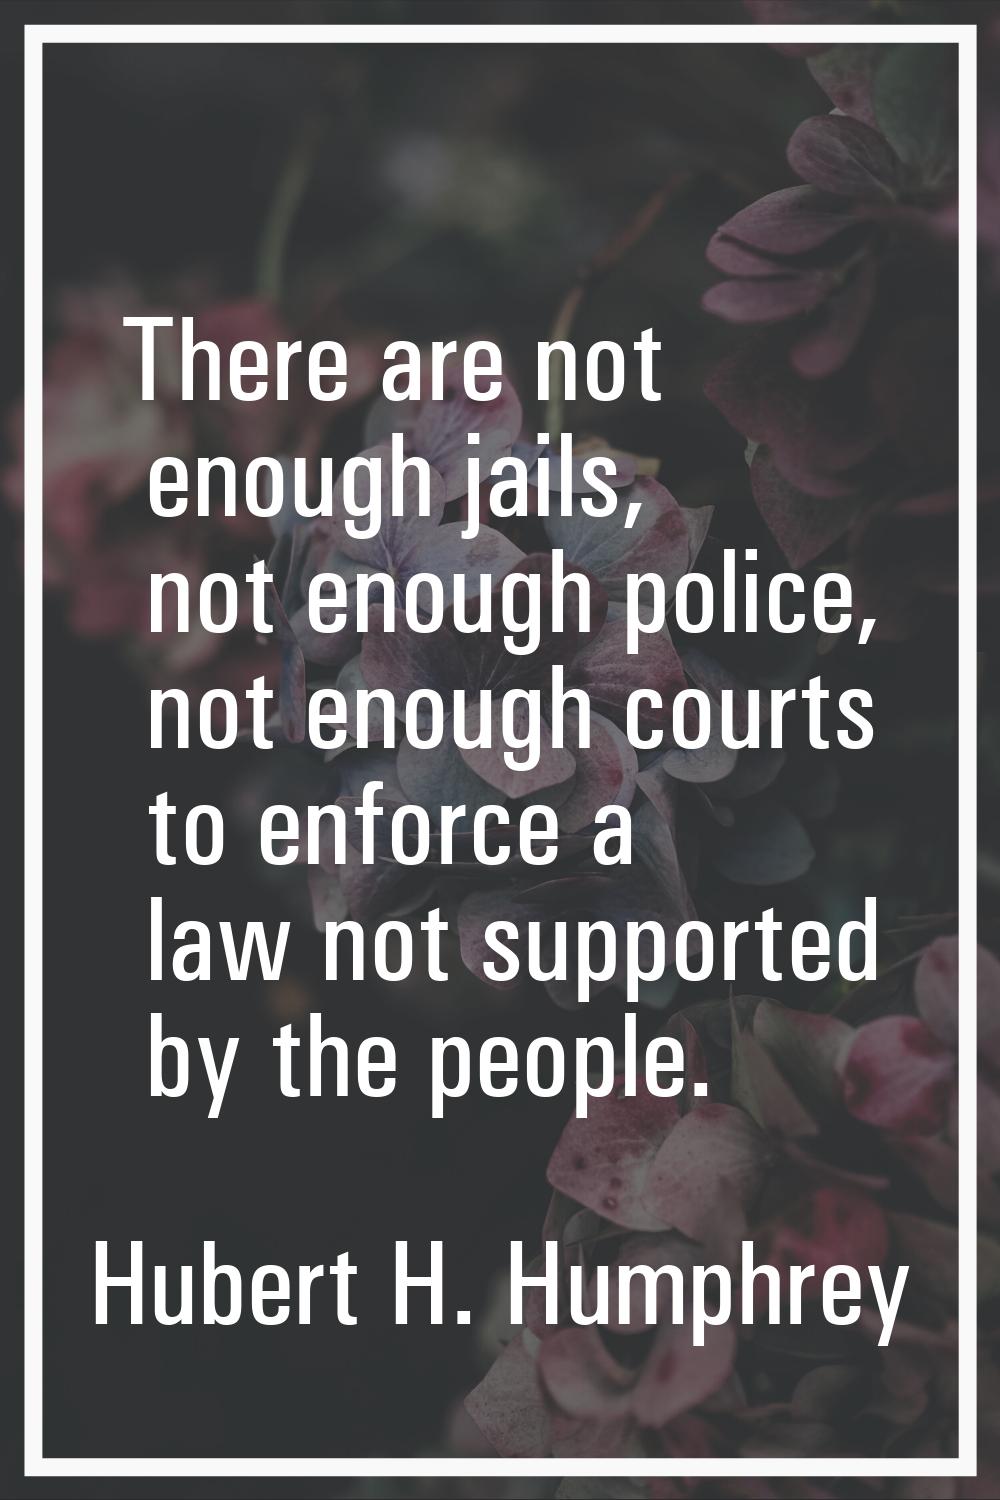 There are not enough jails, not enough police, not enough courts to enforce a law not supported by 